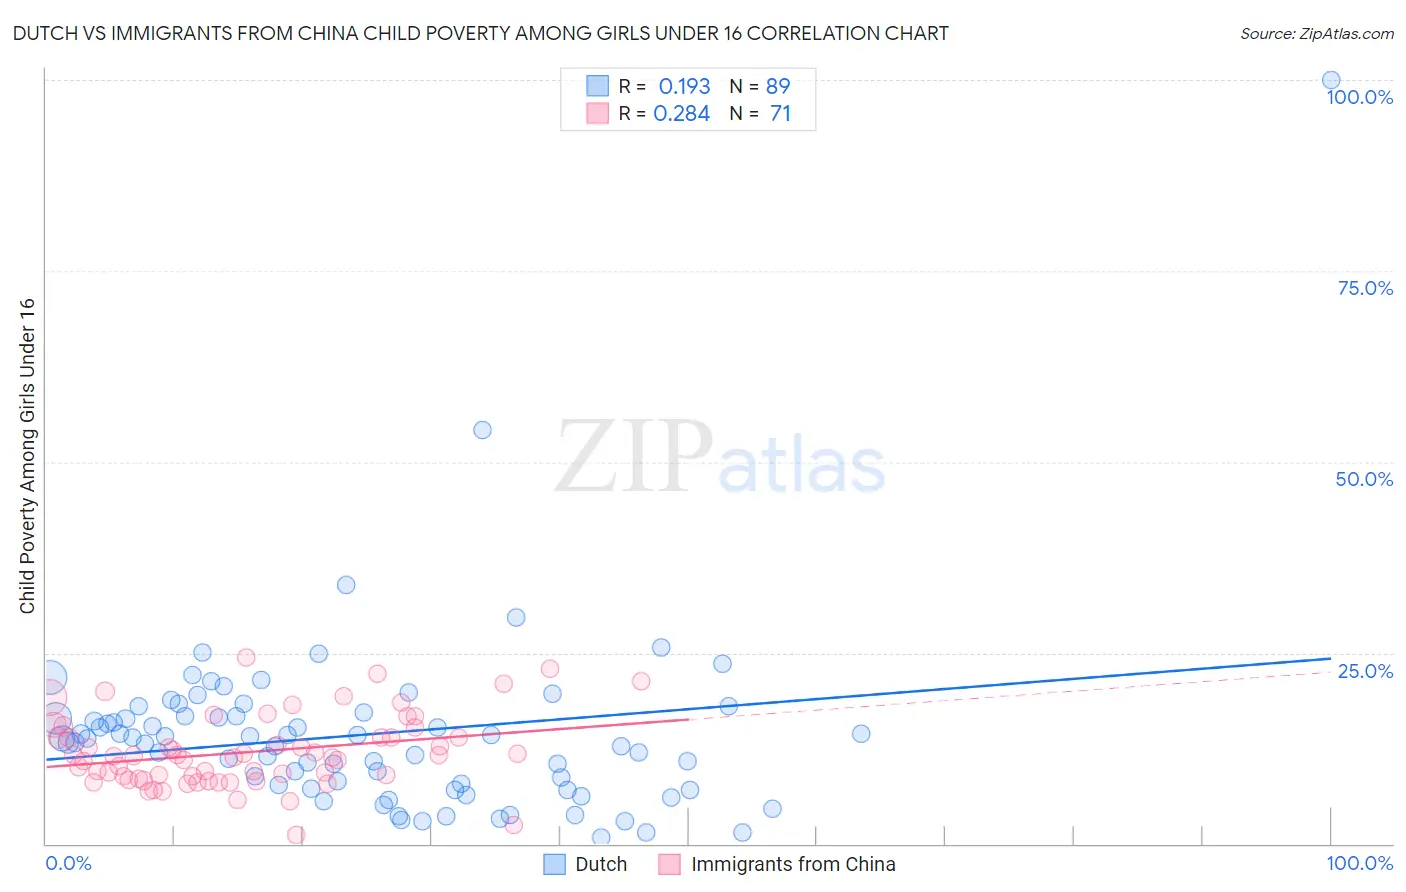 Dutch vs Immigrants from China Child Poverty Among Girls Under 16